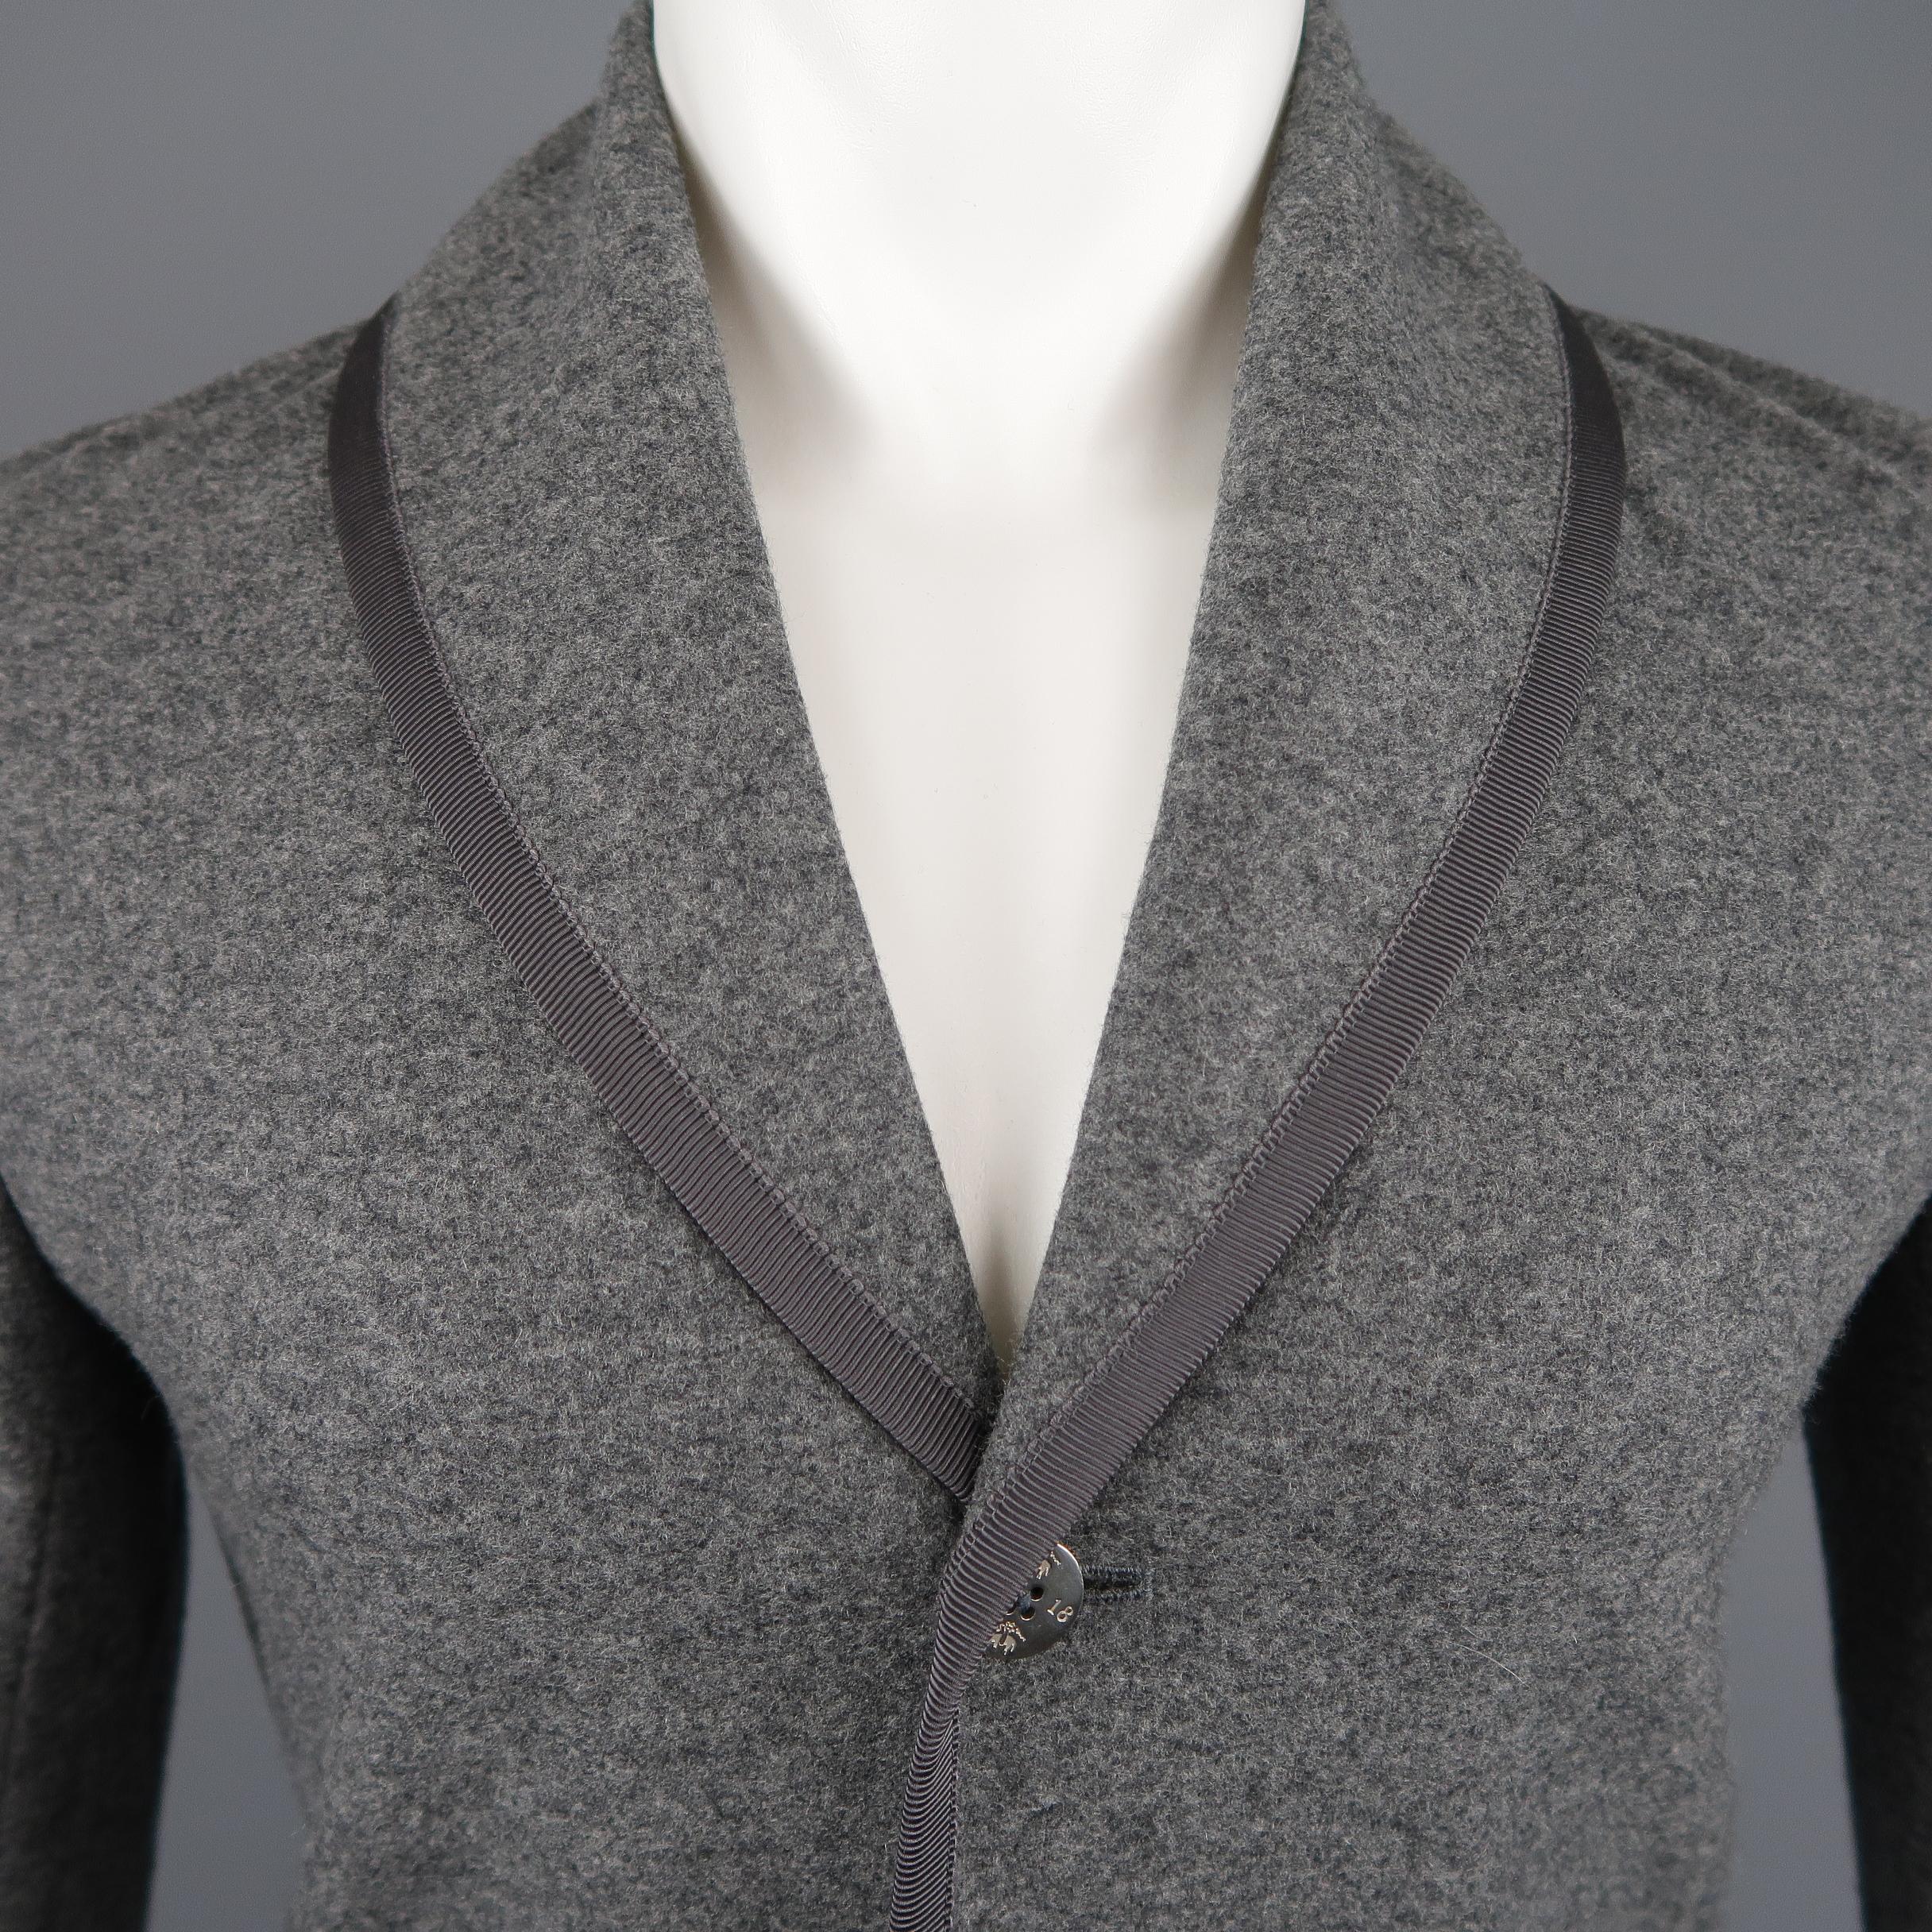 BLACK FLEECE jacket comes in dark heather gray wool blend fabric with a shawl collar, grosgrain piping, patch pockets, and metal embossed buttons. Retail price $1,200.00 
 
Excellent Pre-Owned Condition.
Marked: BB0
 
Measurements:
 
Shoulder: 17